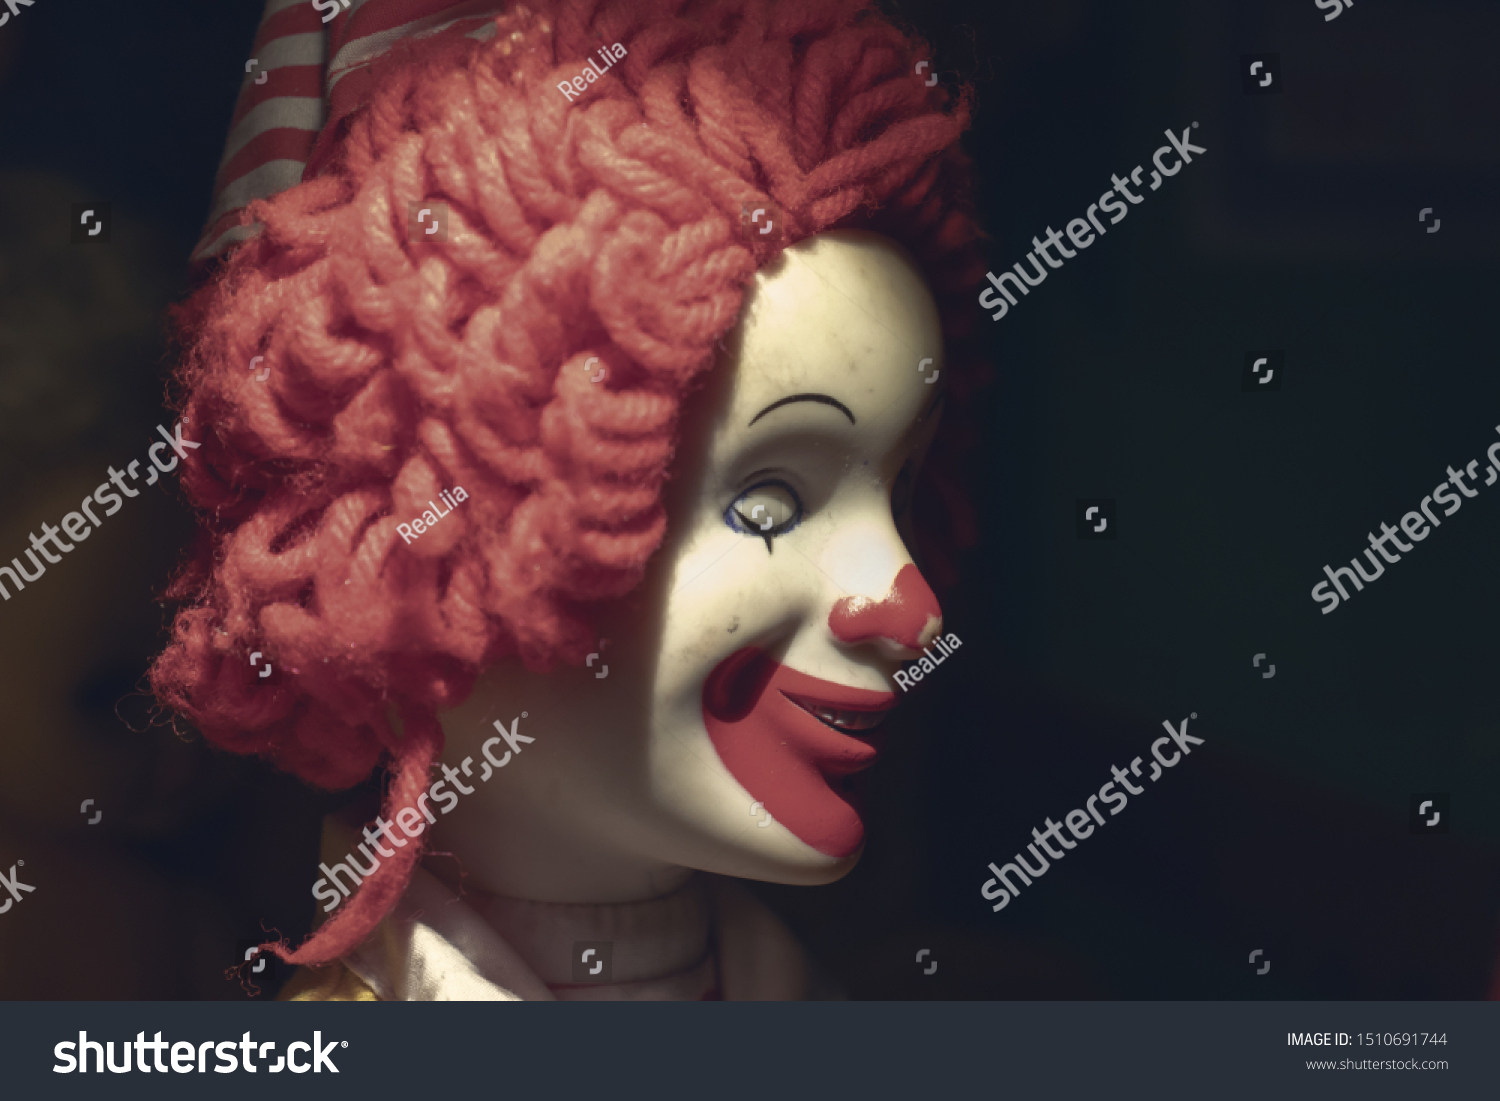 Scary evil sinister clown face with a spooky smile on black background with copy space, coulrophobia and fears concept. #1510691744